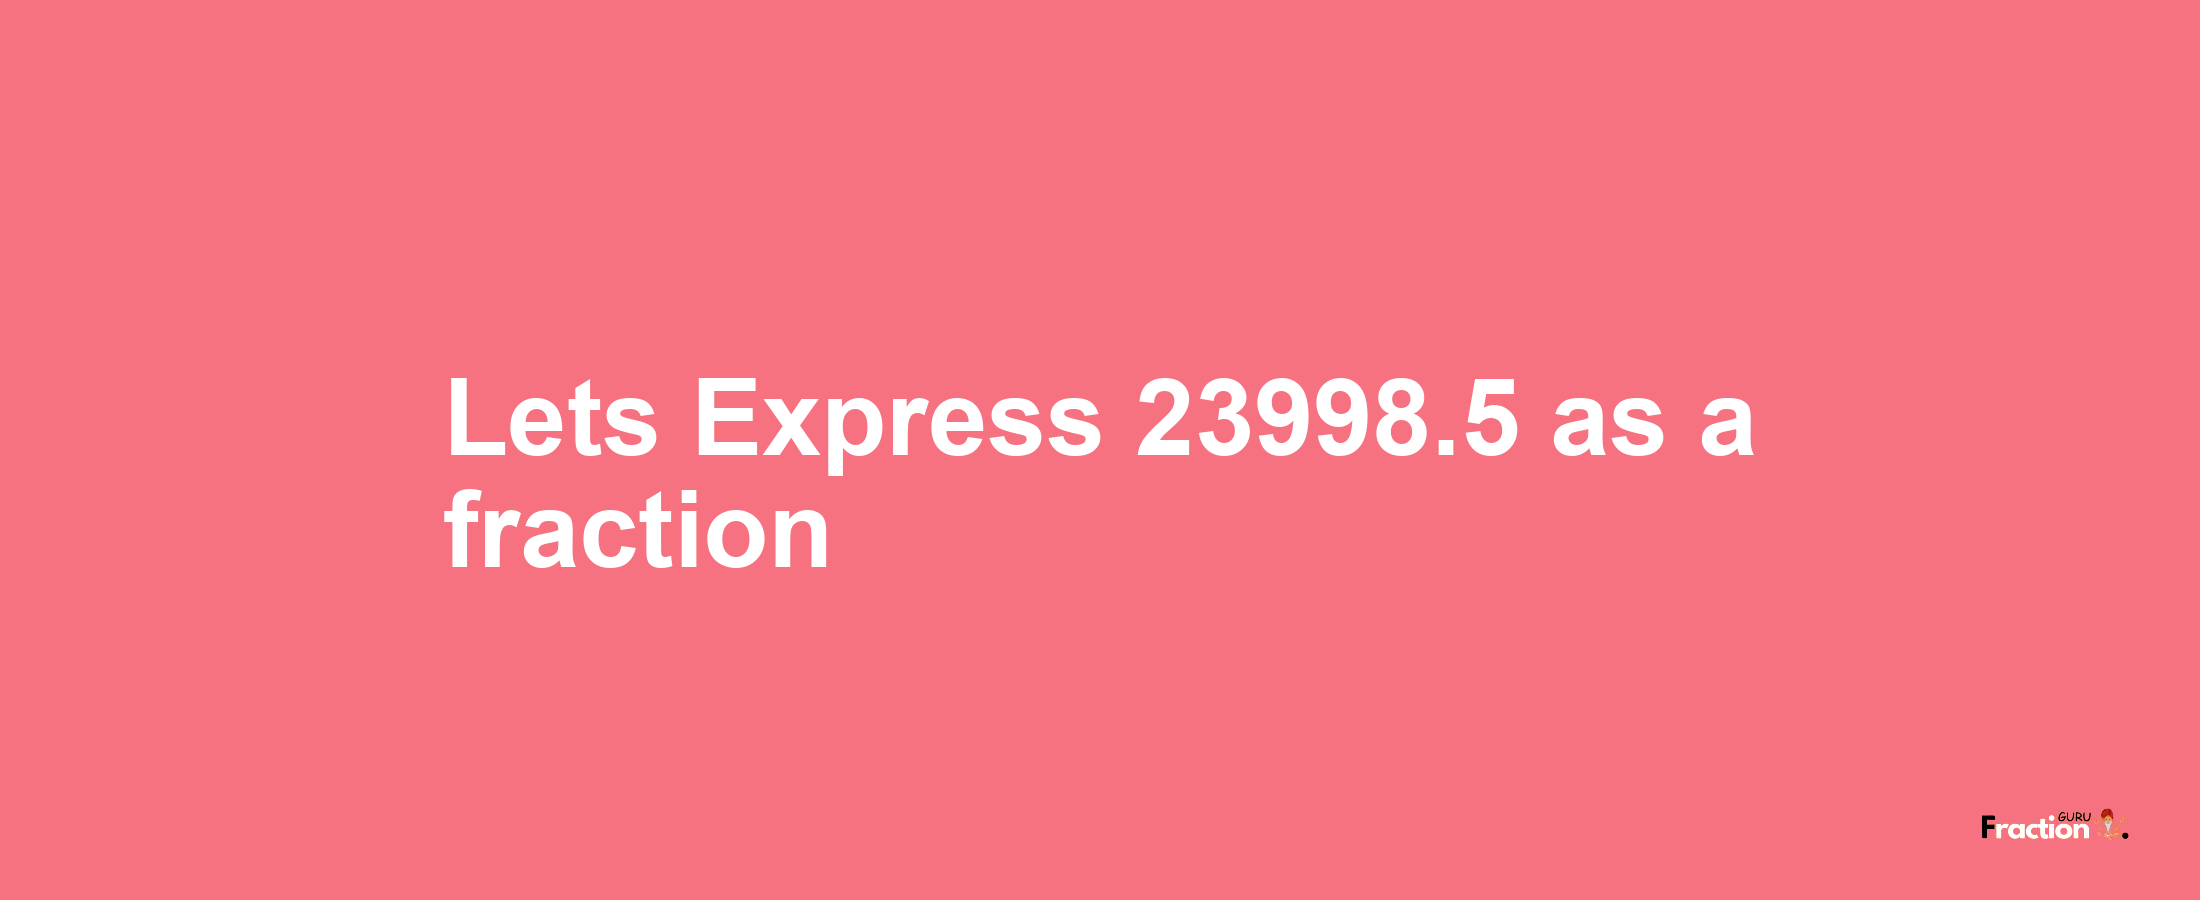 Lets Express 23998.5 as afraction